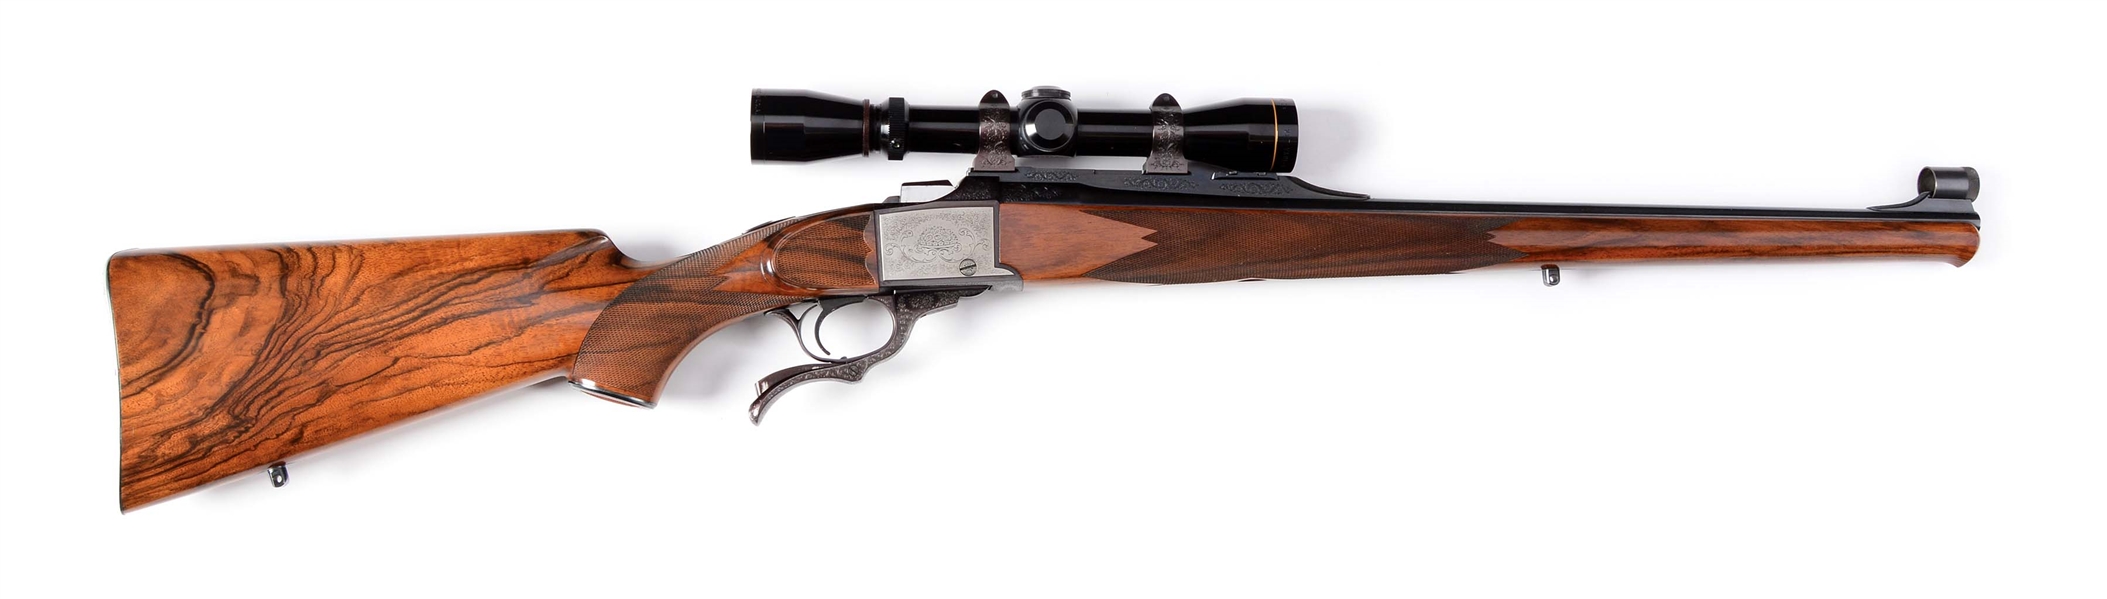 (M) NICELY APPOINTED  FULL STOCK CUSTOM RUGER NO. 1 RIFLE BY PAUL JAEGER WITH SCOPE. 